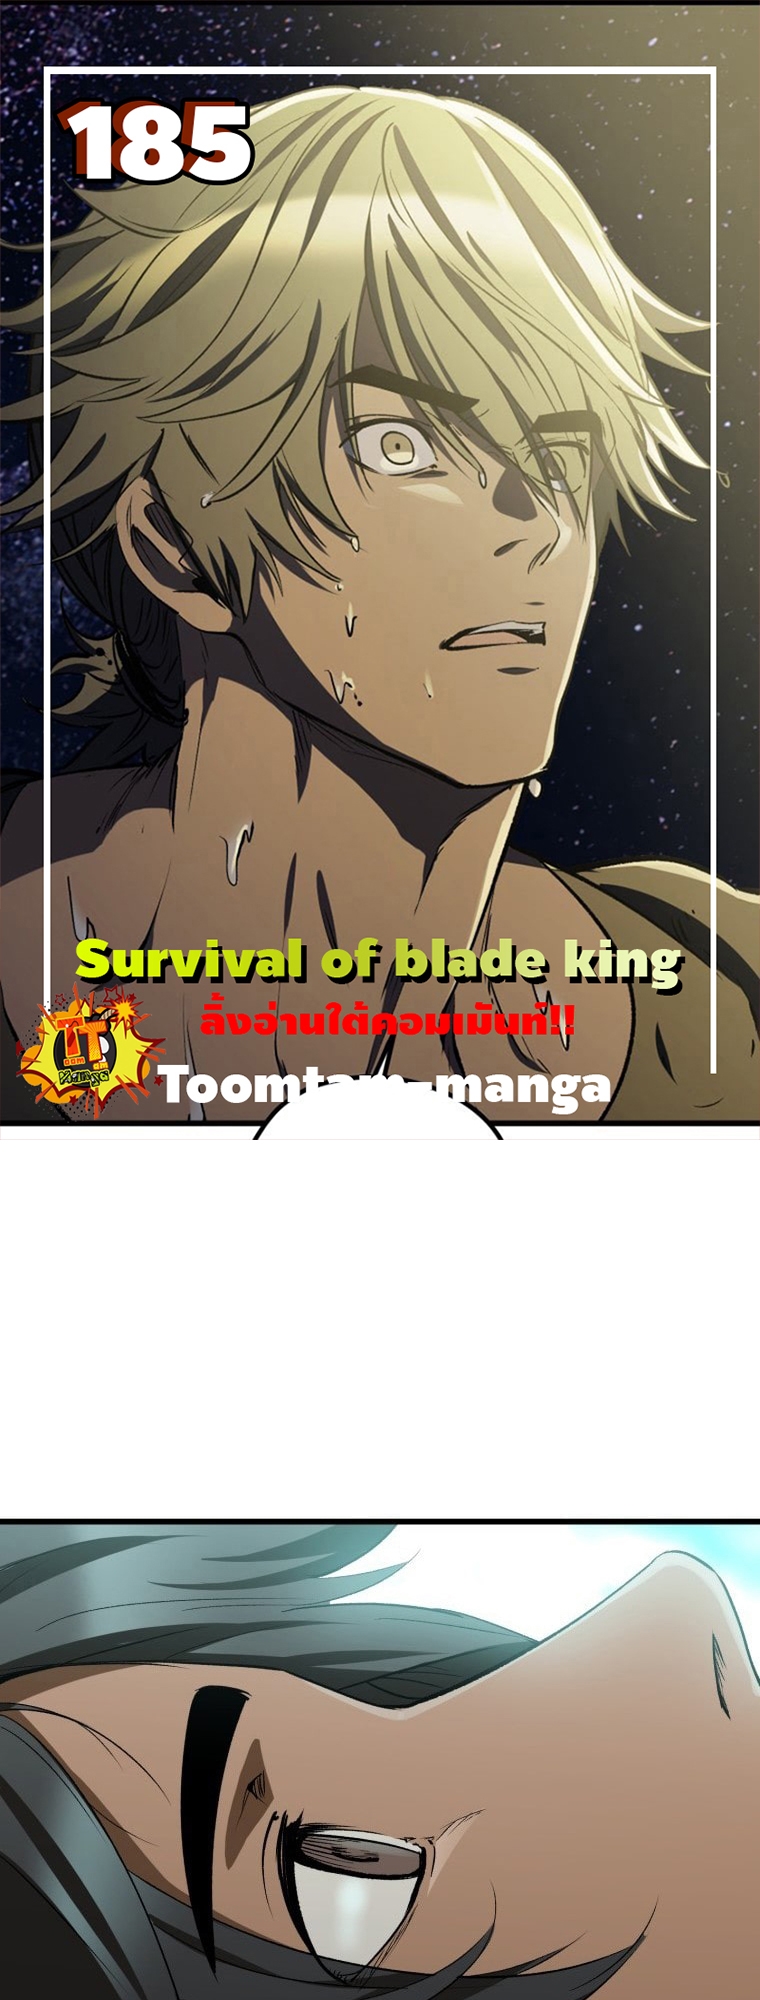 Survival Of Blade King 185 001